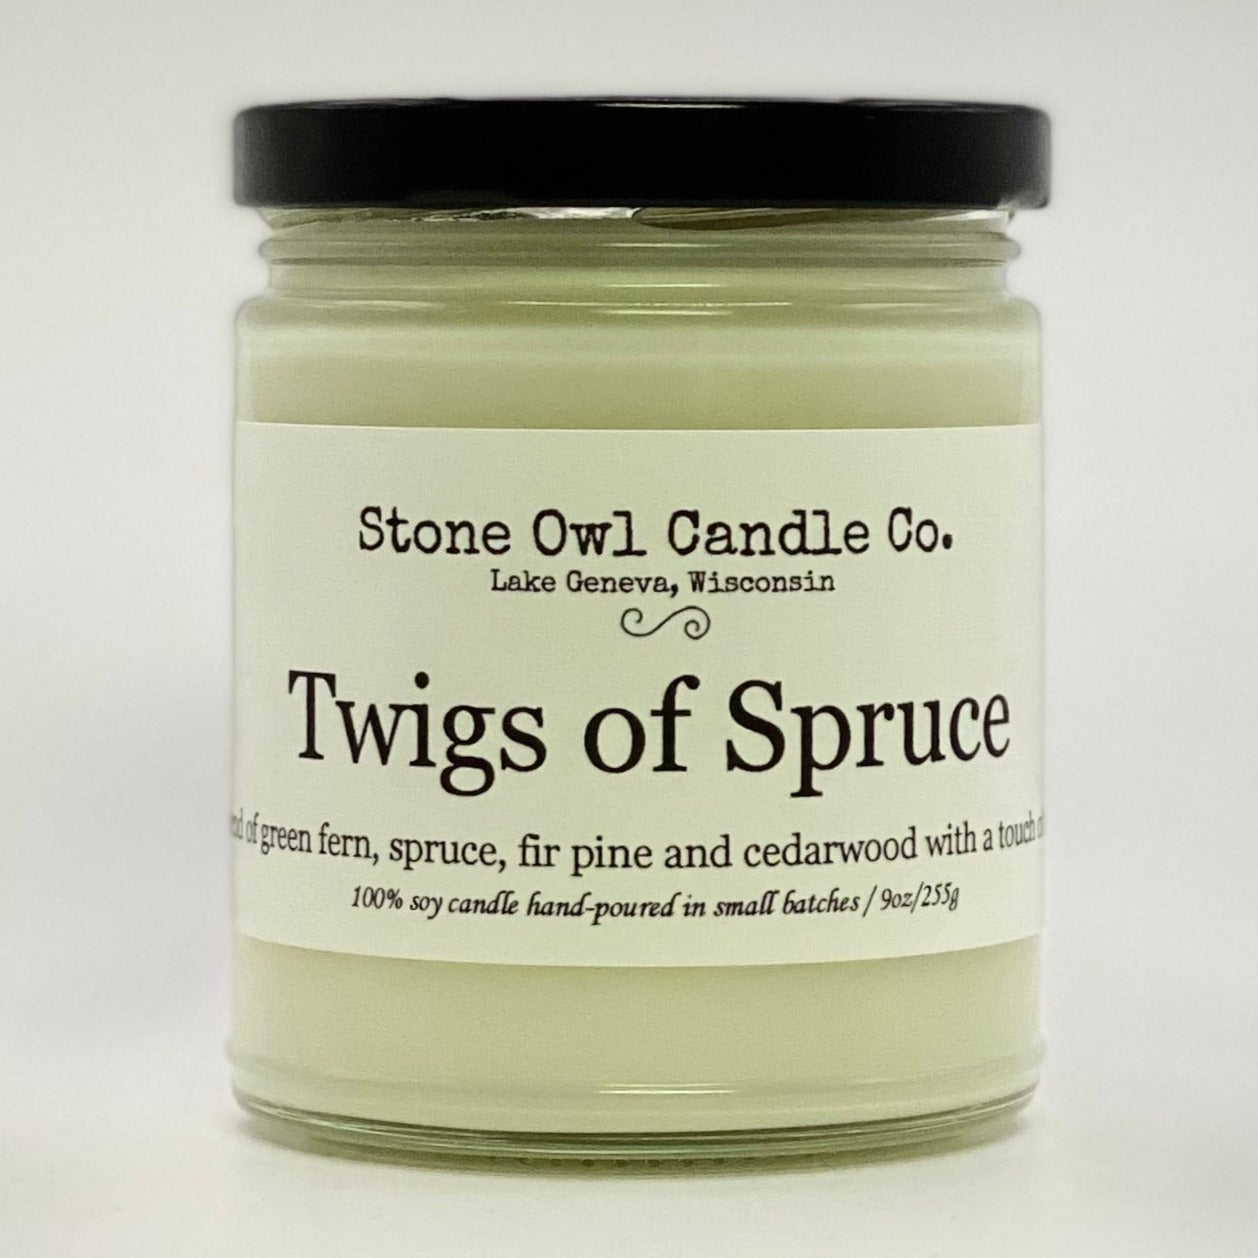 Stone Owl Candle Co. Twigs of Spruce Scent: Blend of green fern, spruce, fir pine and cedarwood with a touch of must.